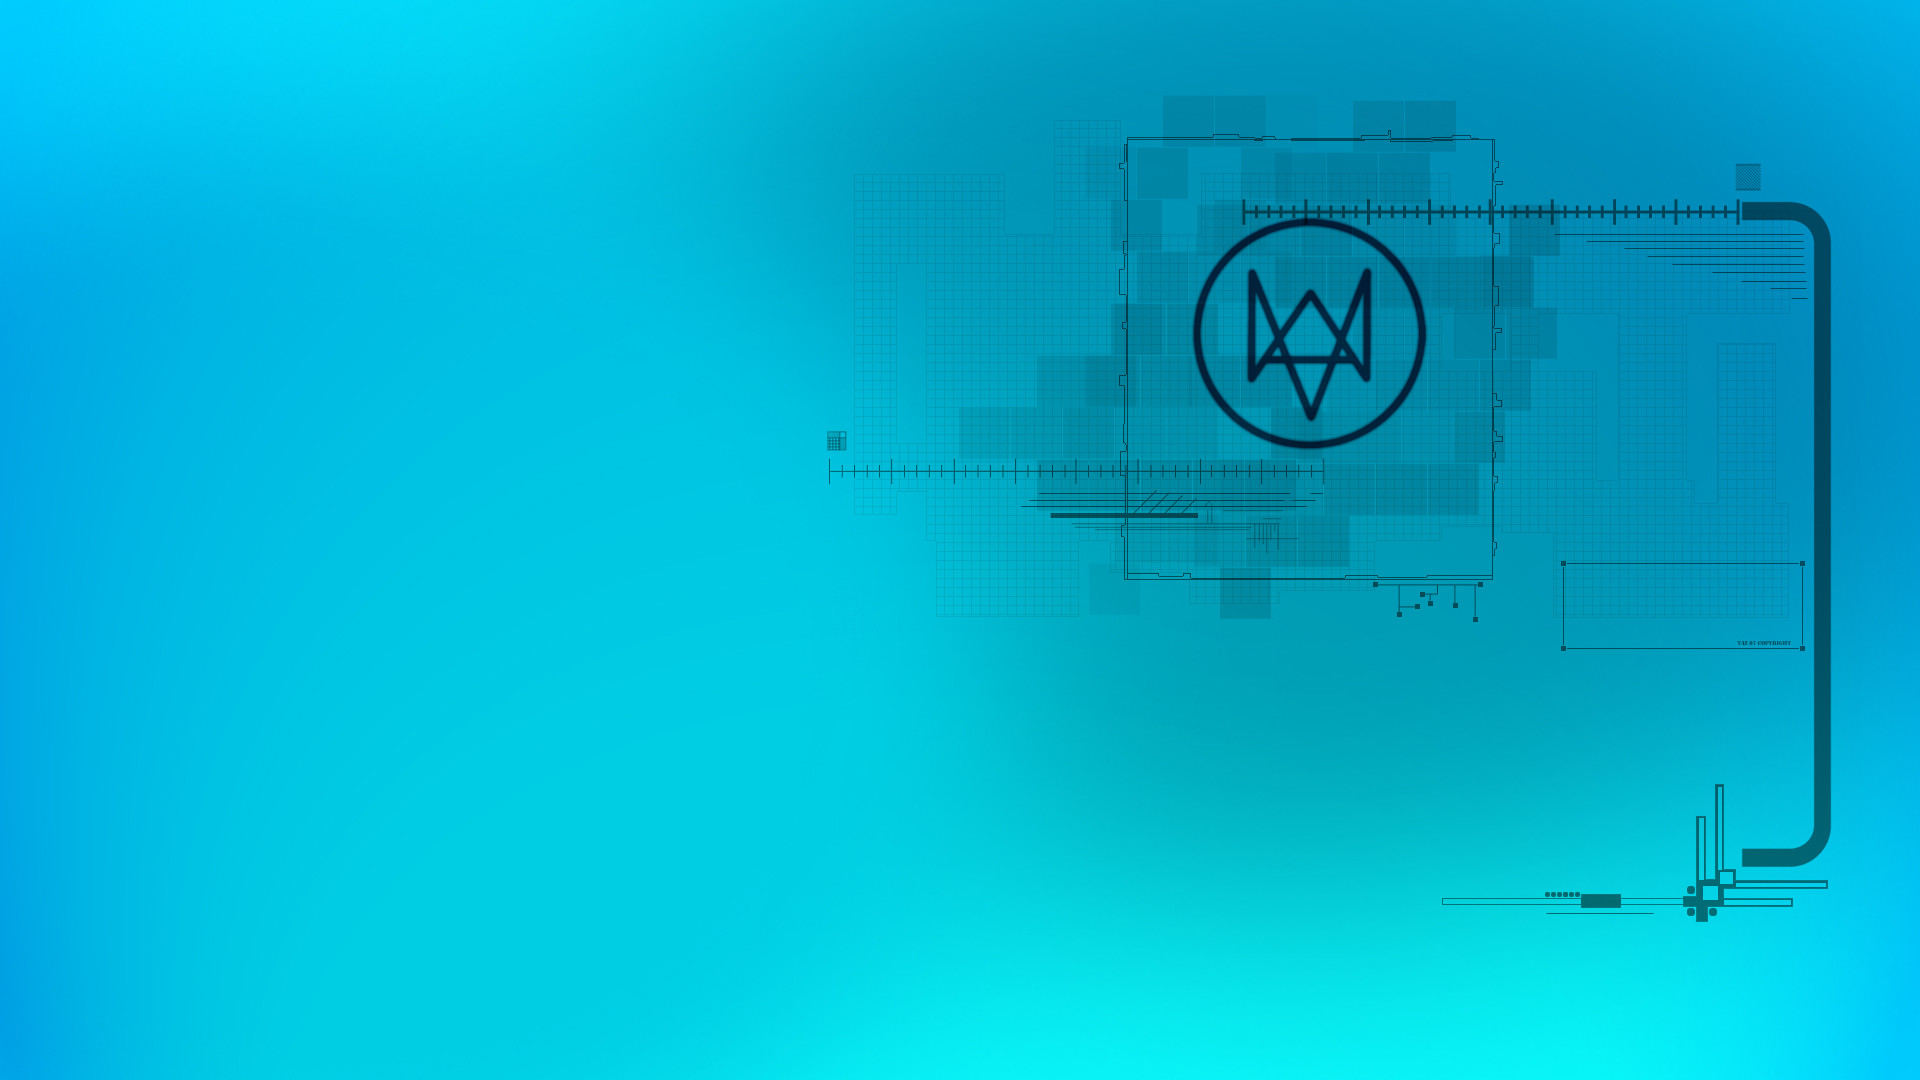 Watch Dogs Wallpaper HD by NIHILUSDESIGNS Watch Dogs Wallpaper HD by NIHILUSDESIGNS